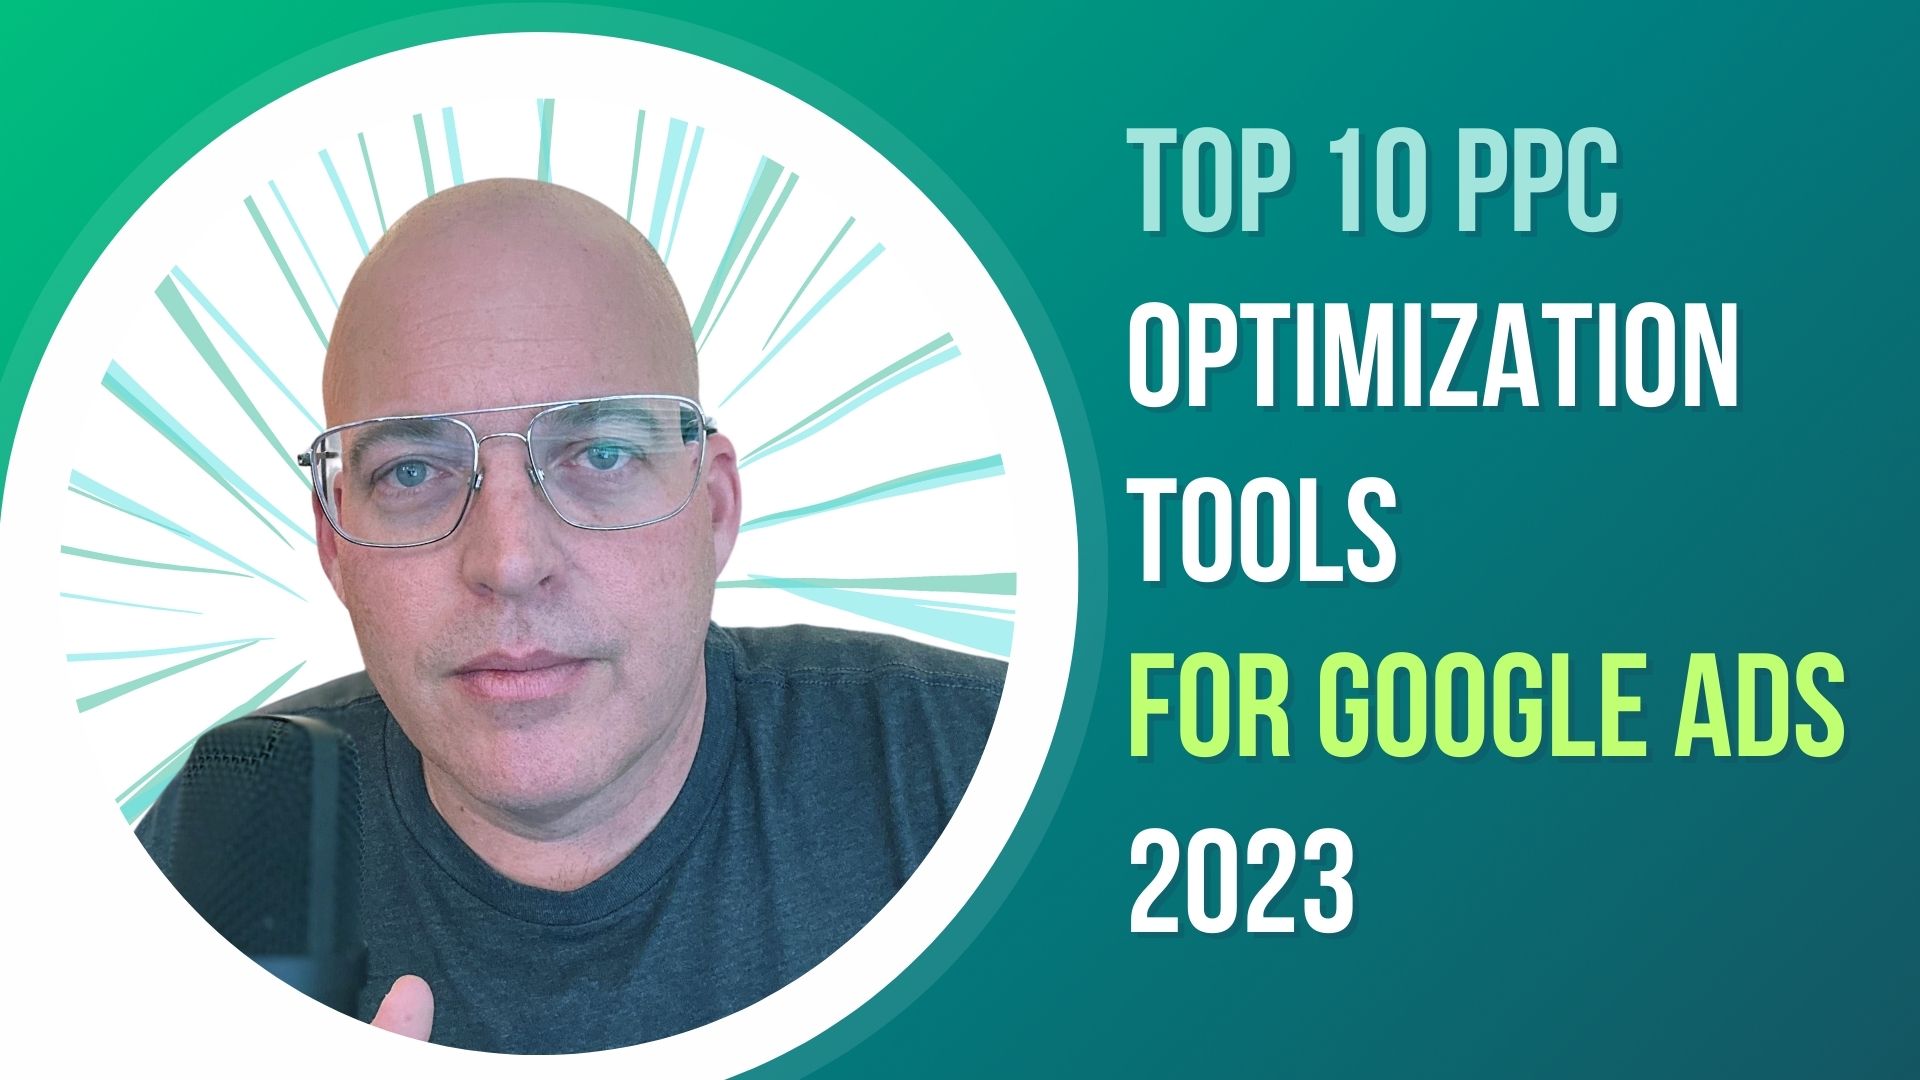 Top 10 PPC Optimization Tools for Google Ads 2023